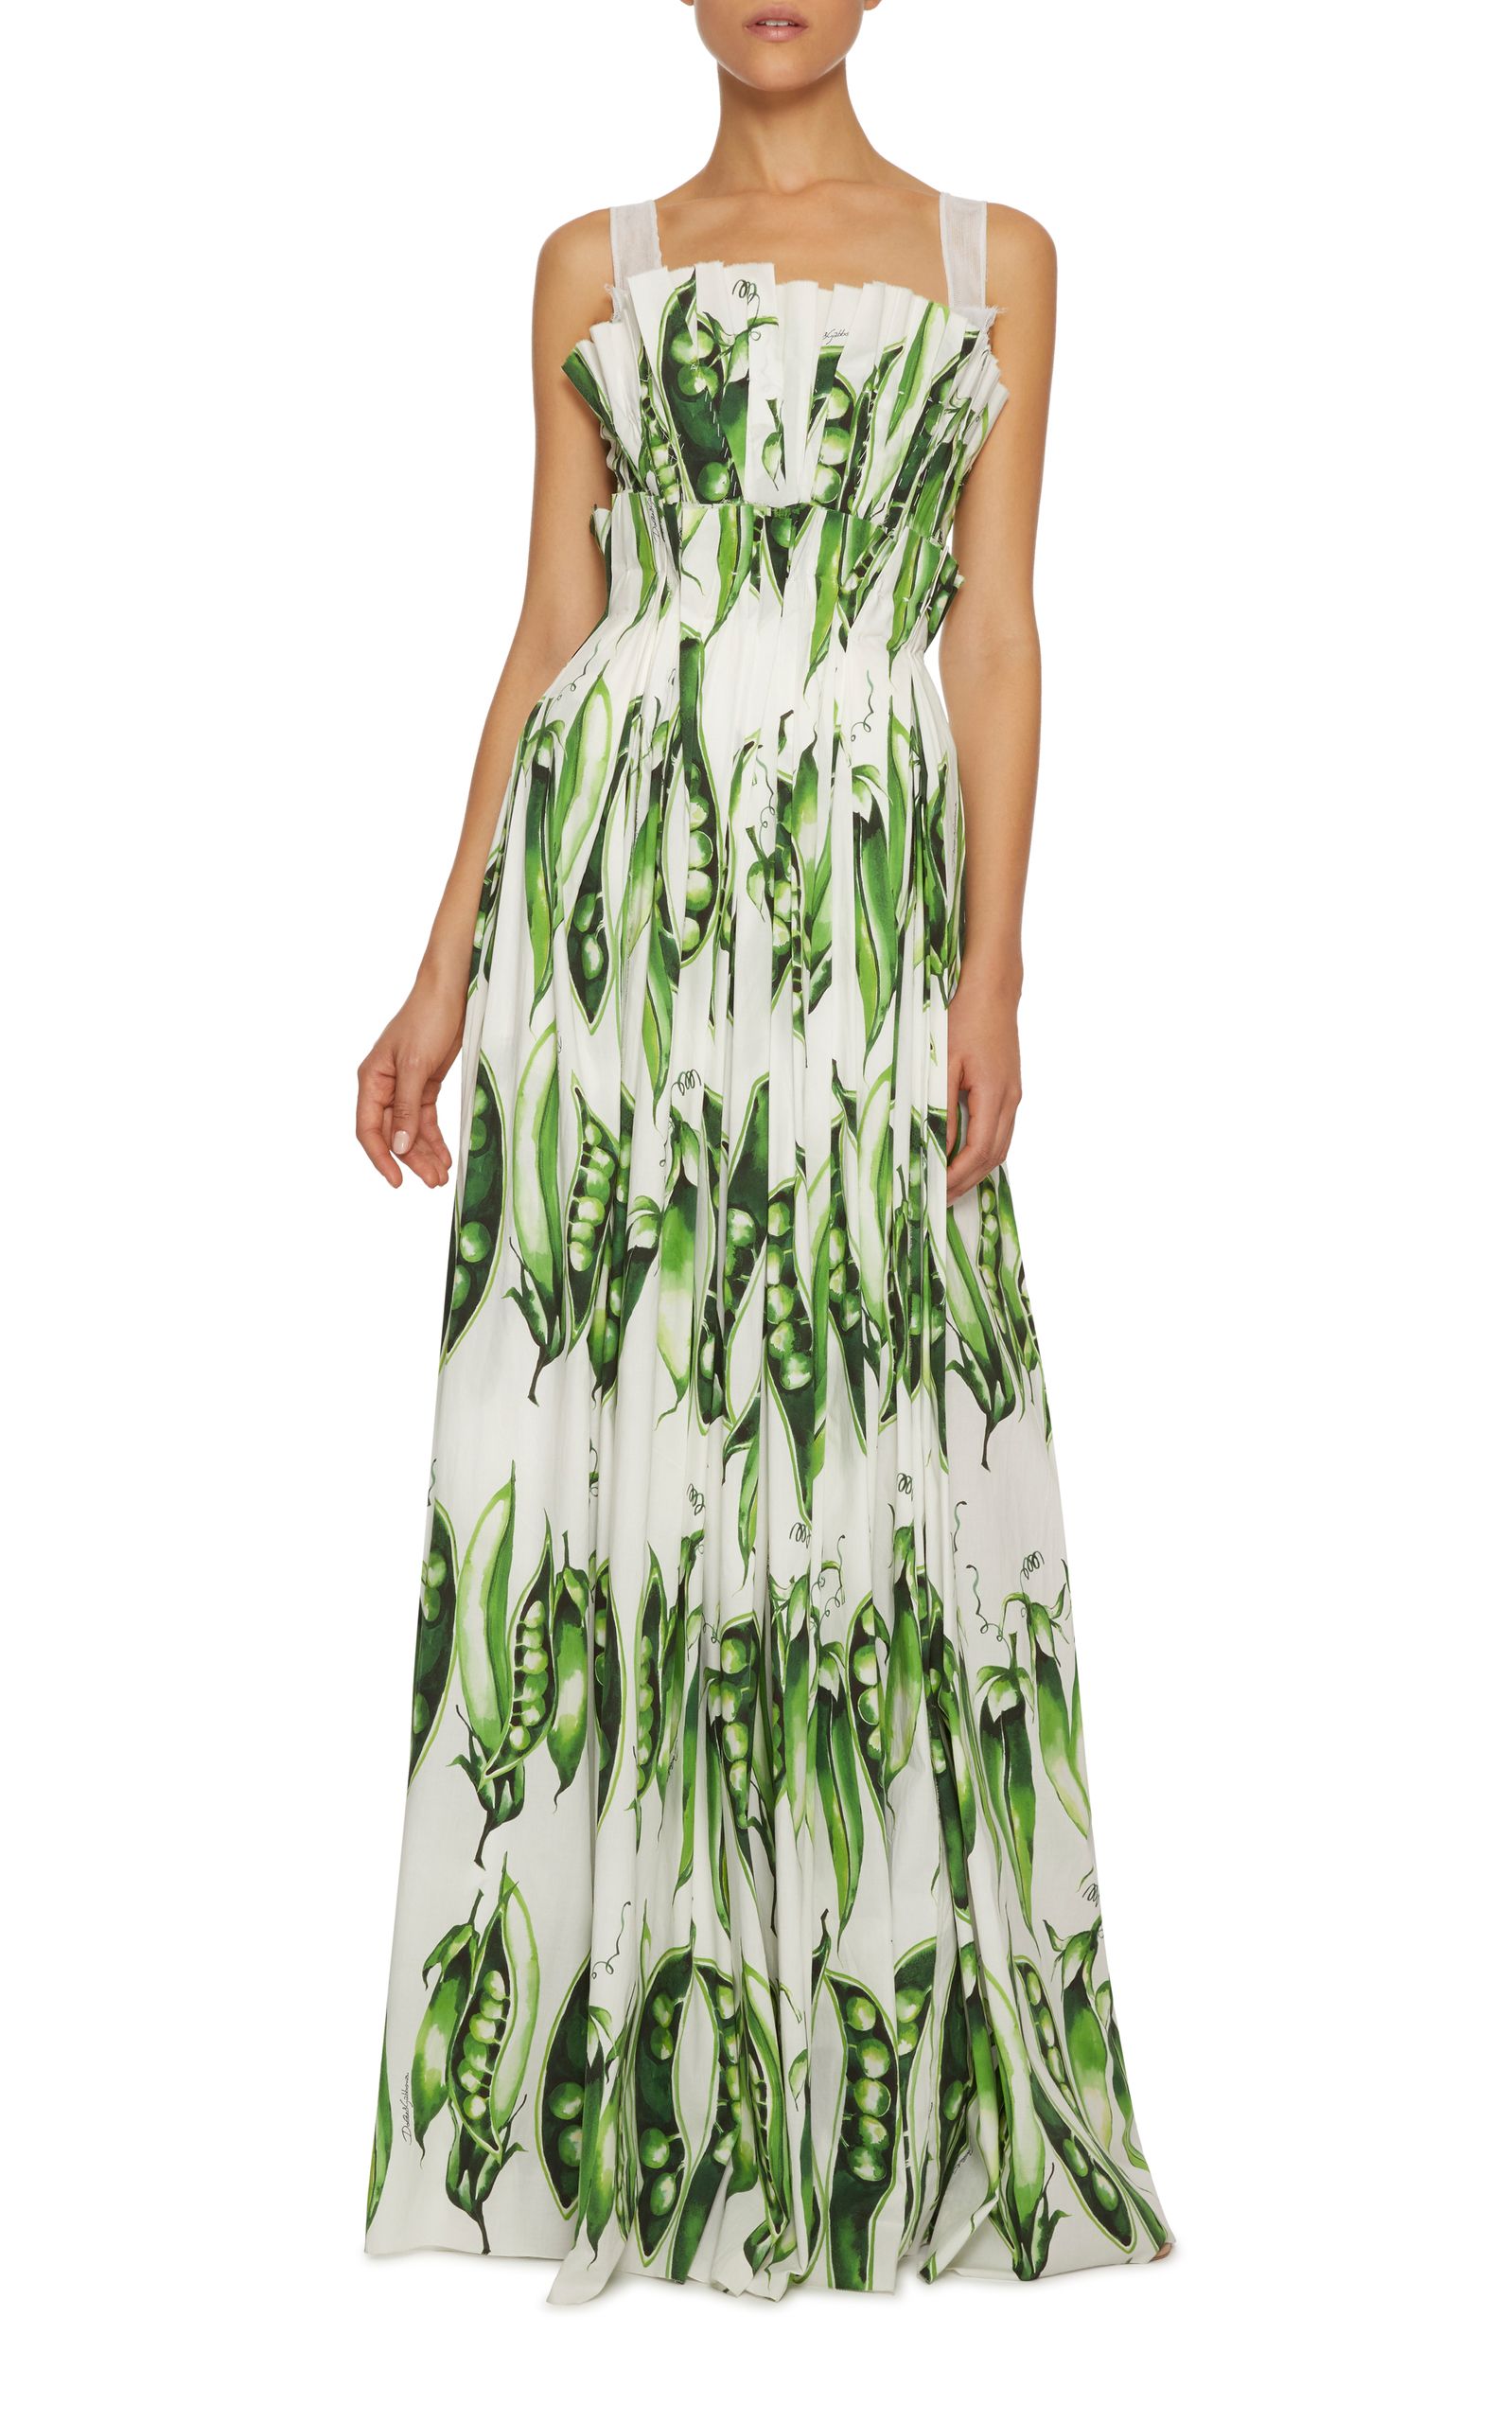 Dolce and Gabbana | Snap Pea Print Gown | Spring and Summer Dresses ...